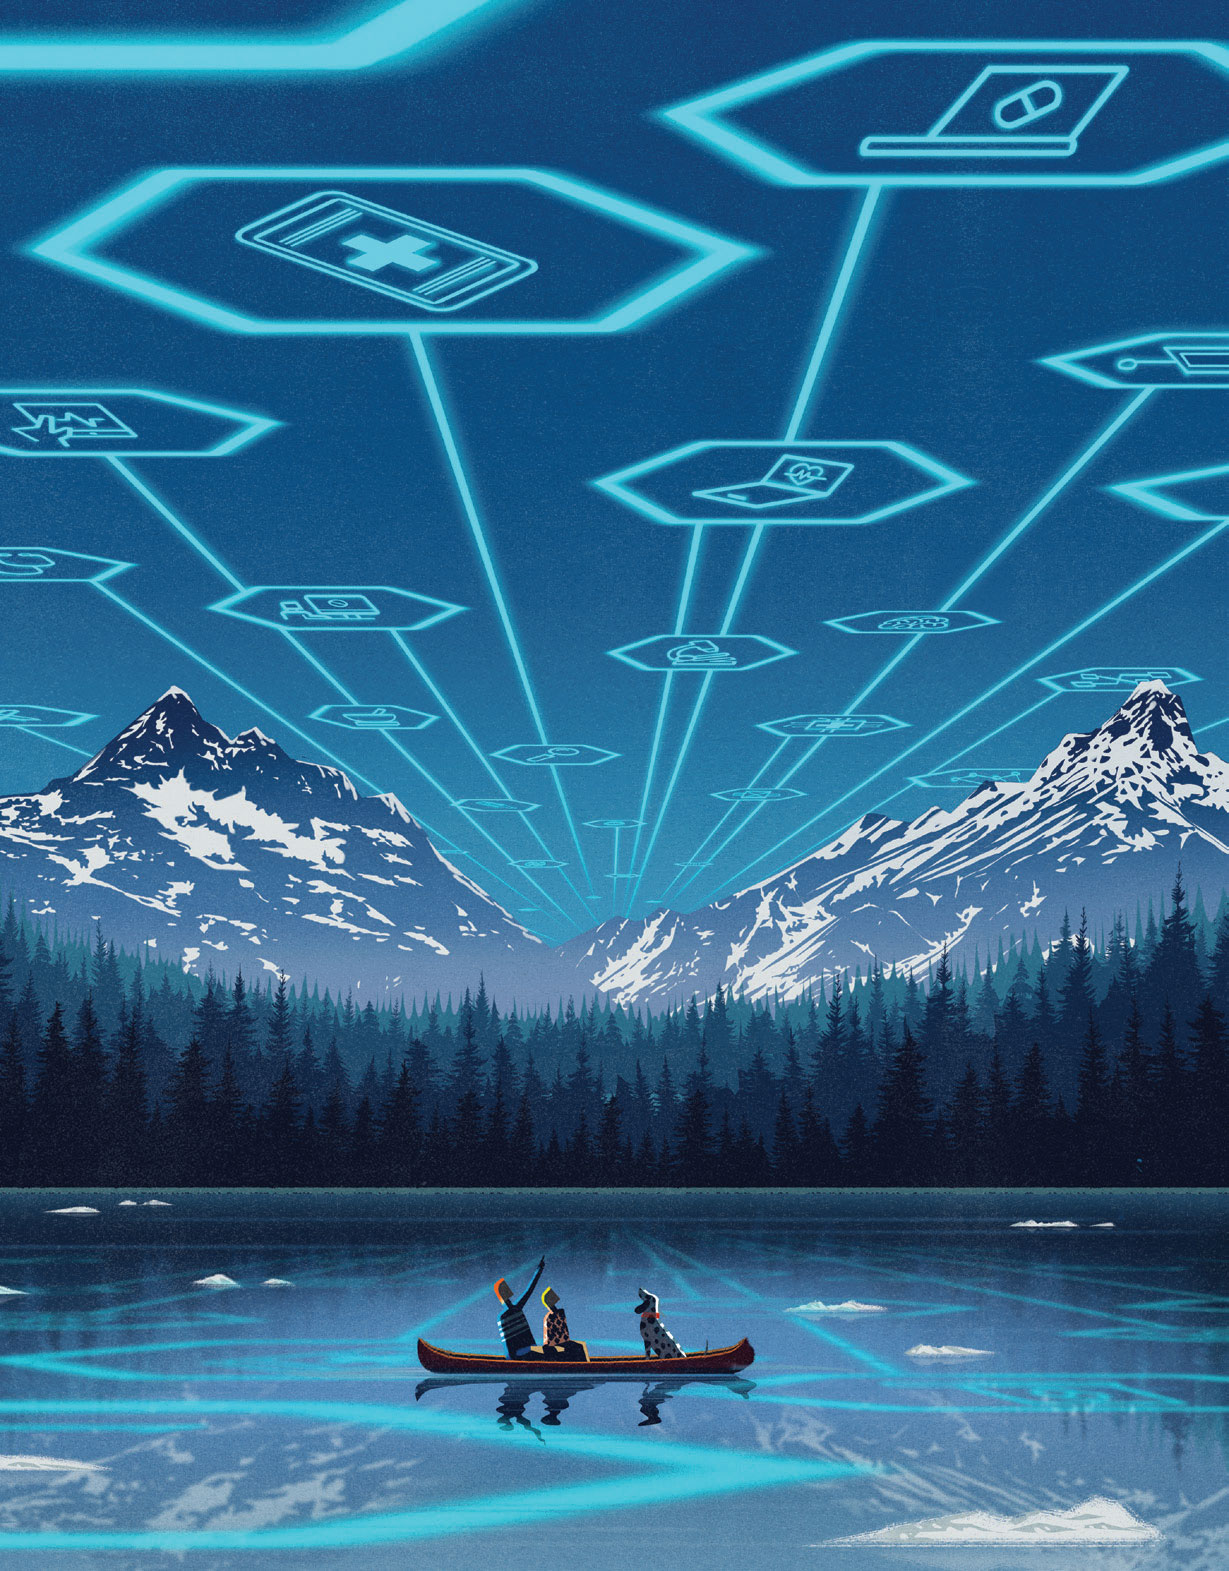 telehealth application icons are projected over the scene of a family sitting in a canoe on a lake with trees and snowy mountains